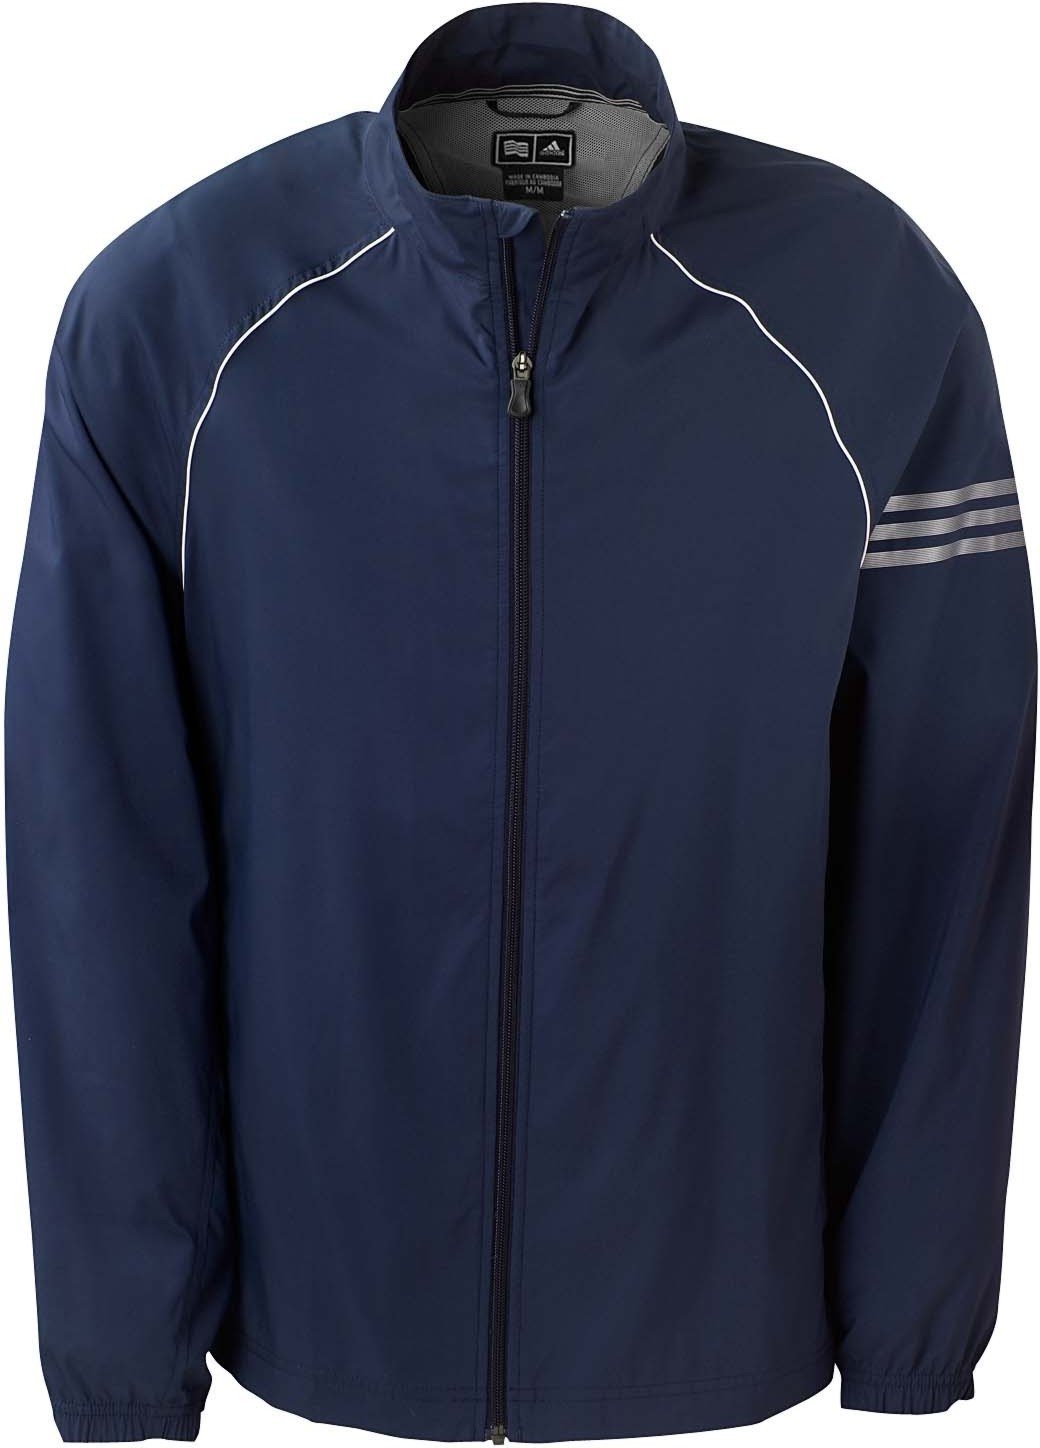 A69 ClimaProof 3 Stripes Full Zip Jackets